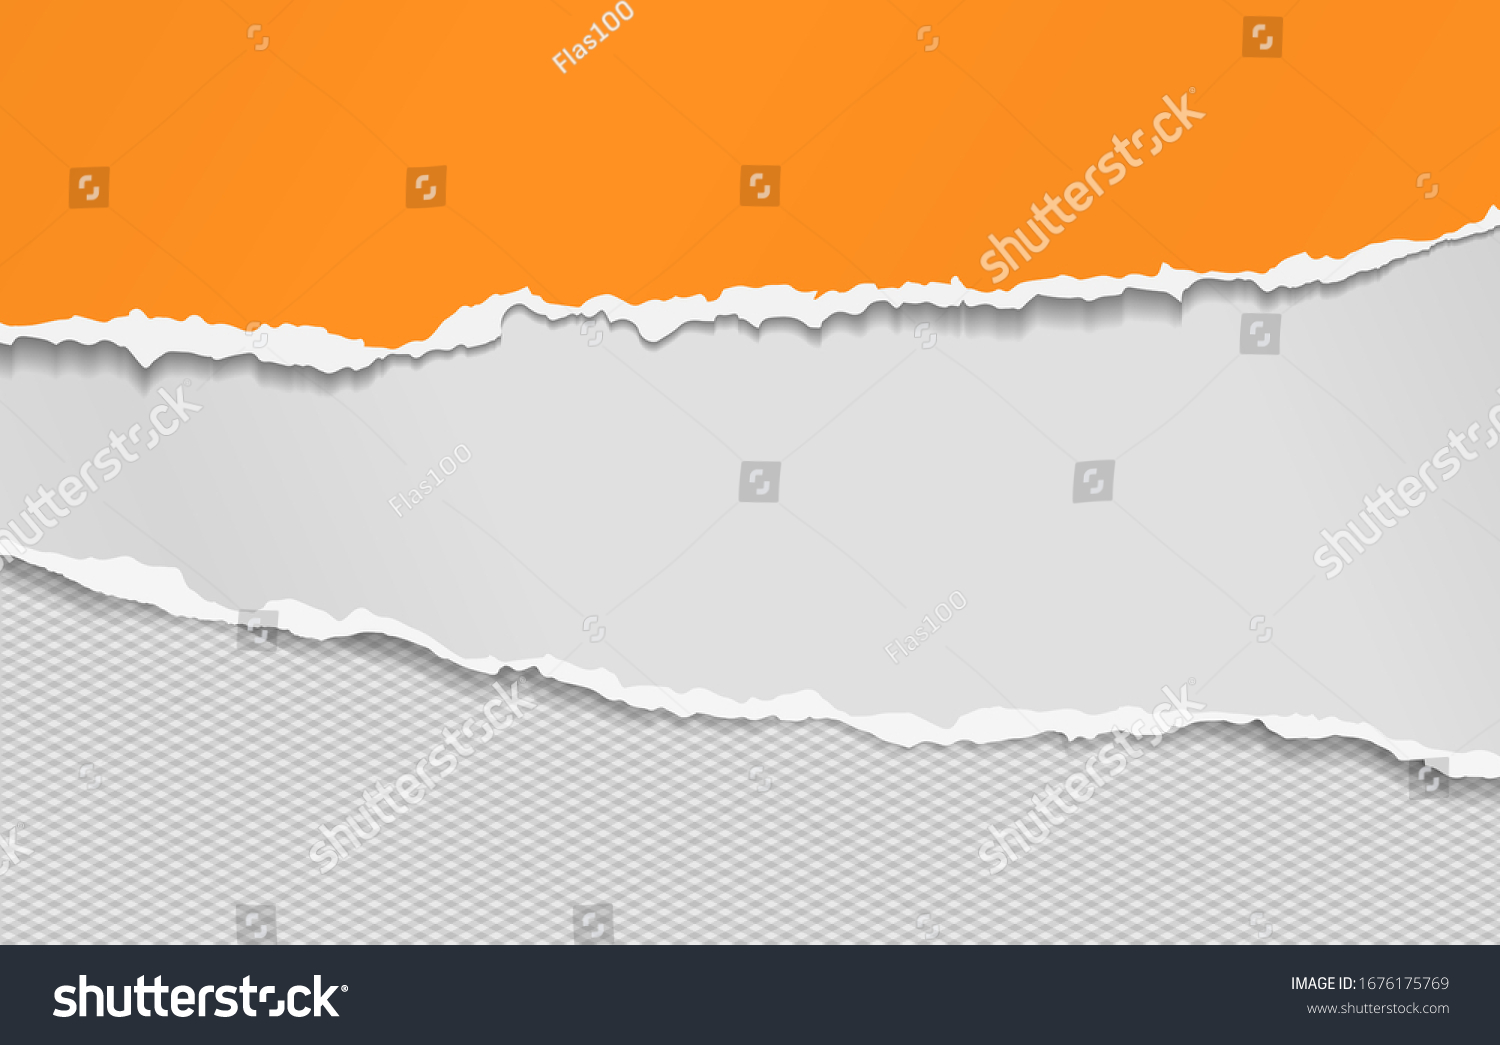 Torn, ripped pieces of horizontal orange and white paper with soft shadow are on grey squared background for text. Vector illustration #1676175769